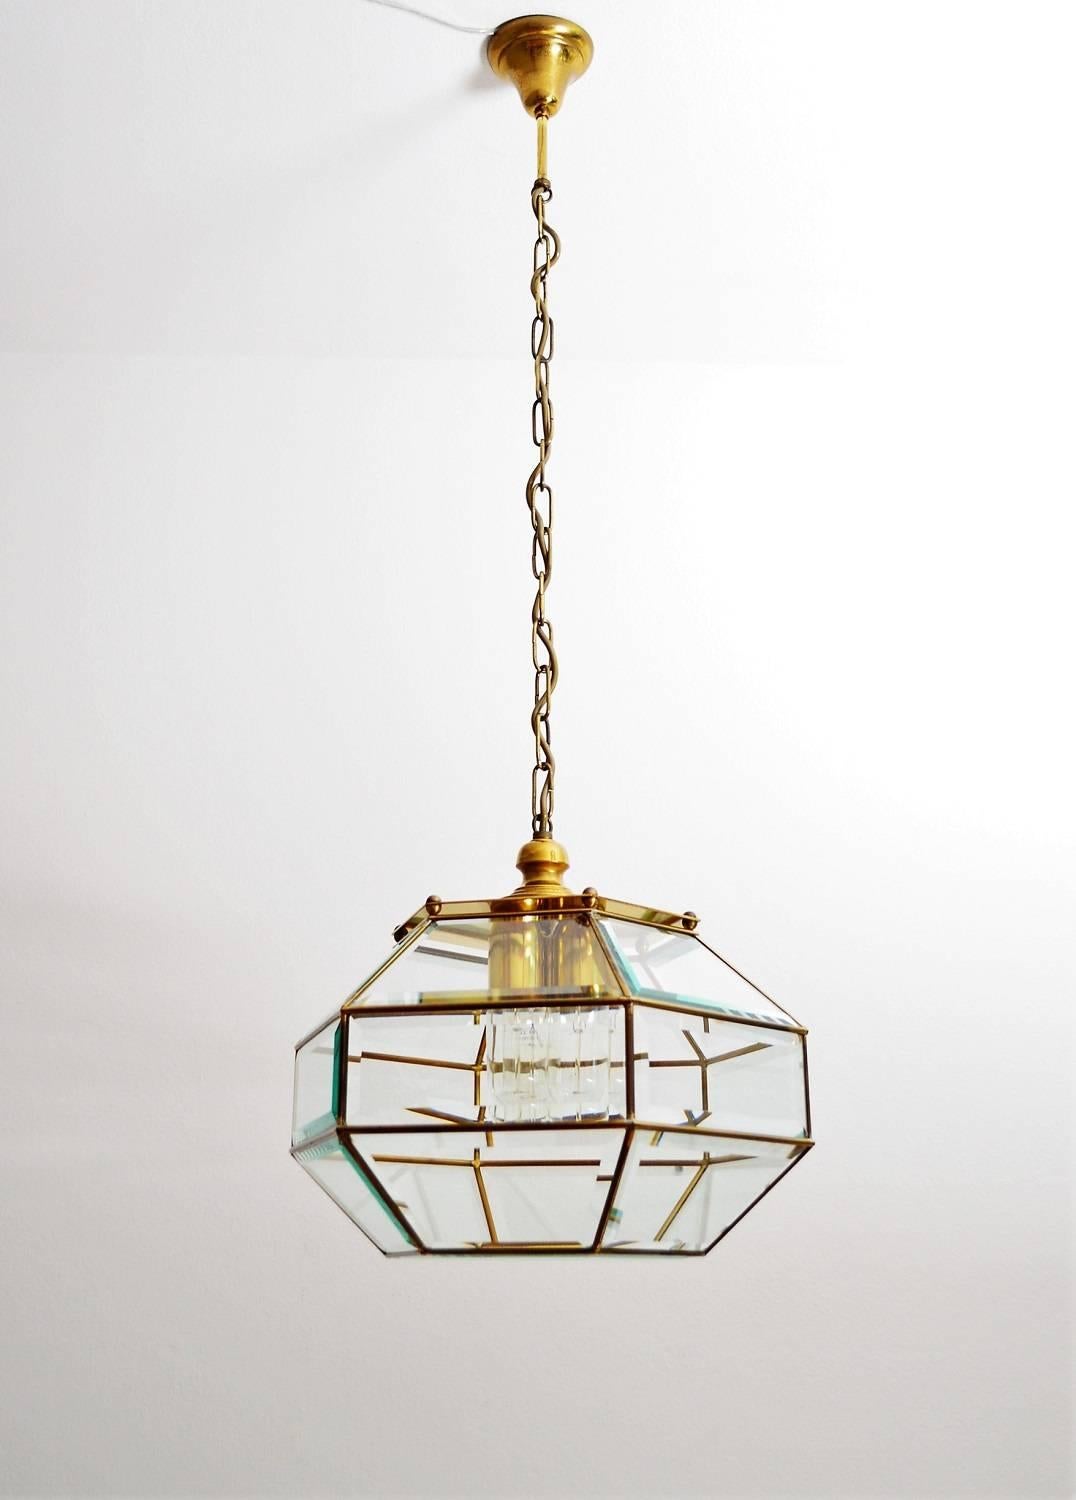 Beautiful ceiling pendant or glass lantern from the Italian, 1960s.
Made of shiny cut crystal glass and brass frame as well as brass details with dark patina.
The lamp works with three big light bulbs.
The height of only lantern (without chain)